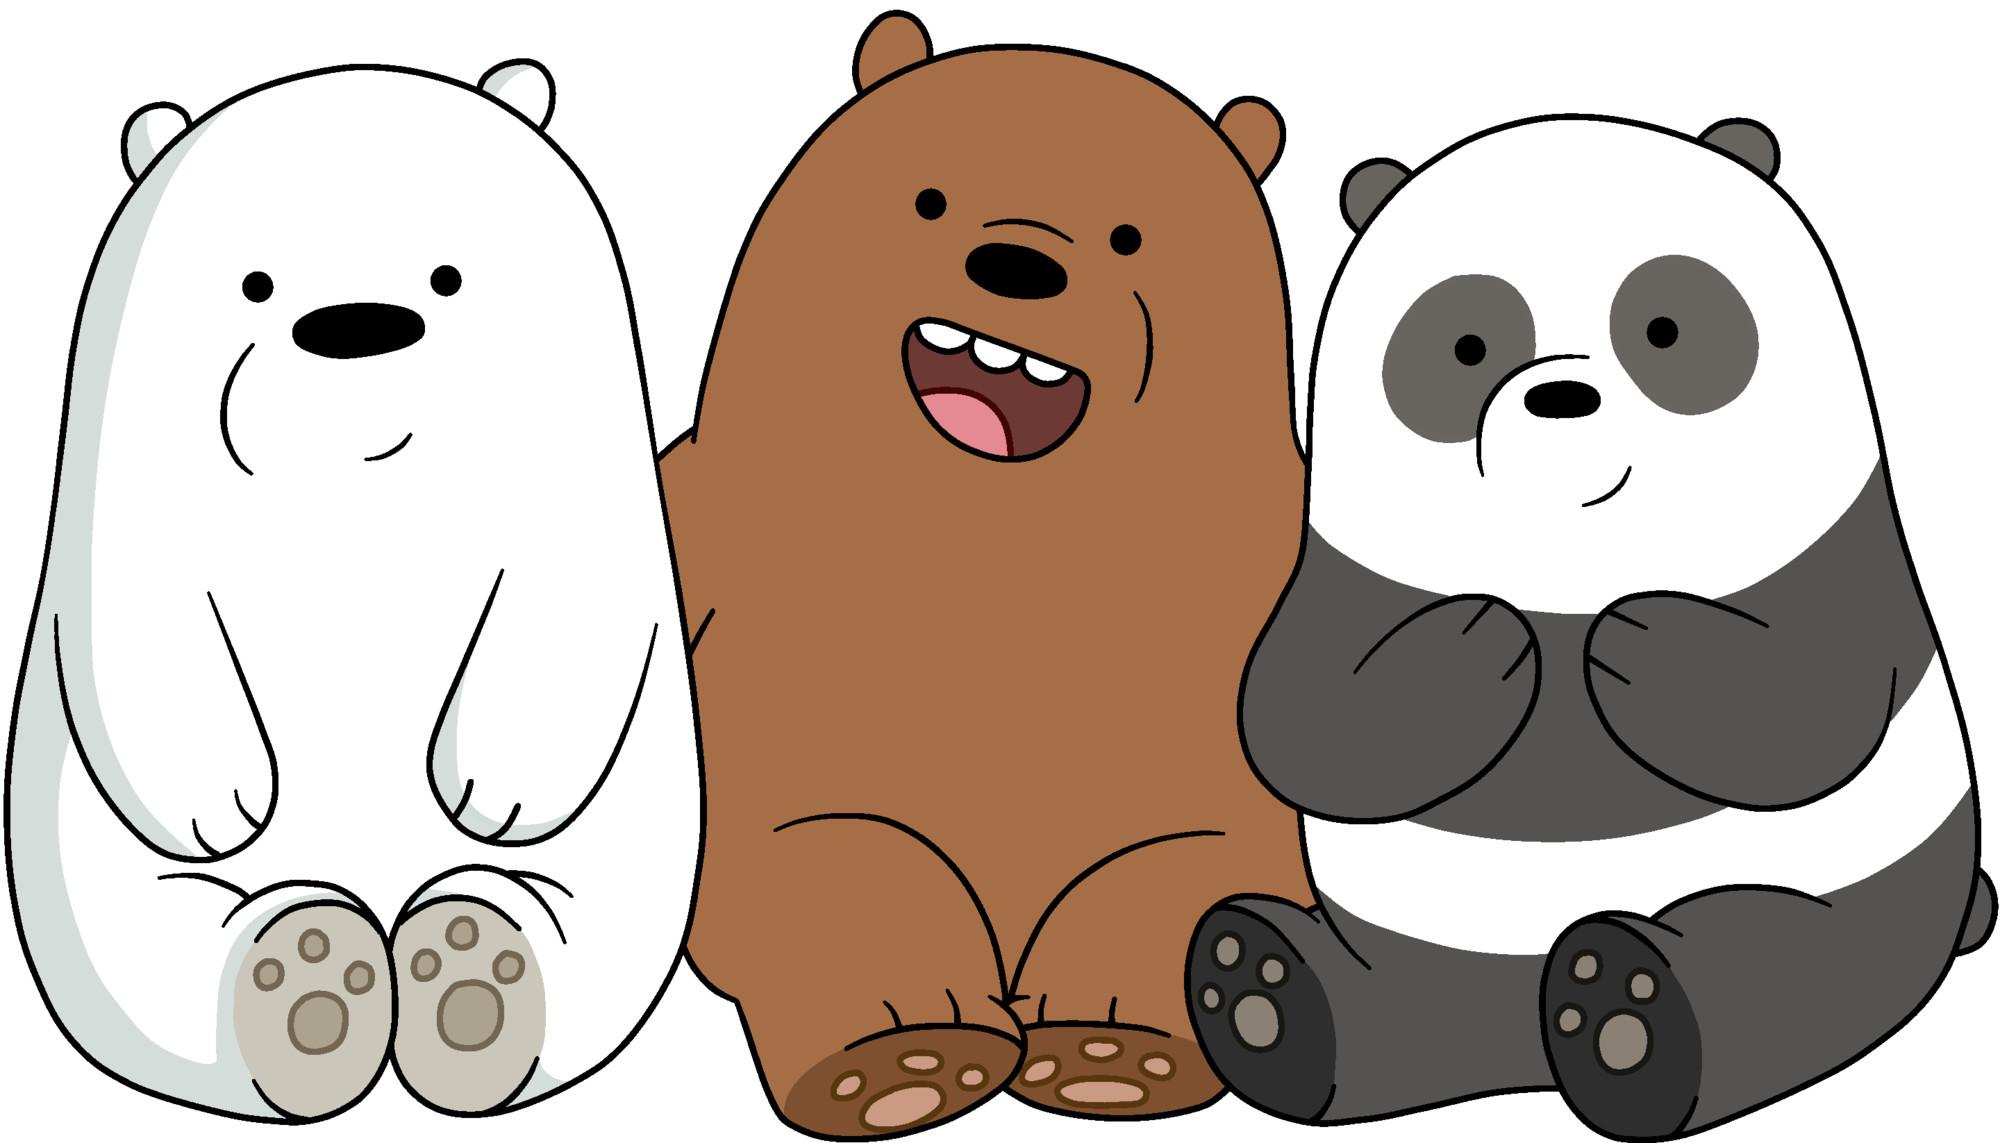 Laptop We Bare Bears Hd Wallpapers - Wallpaper Cave